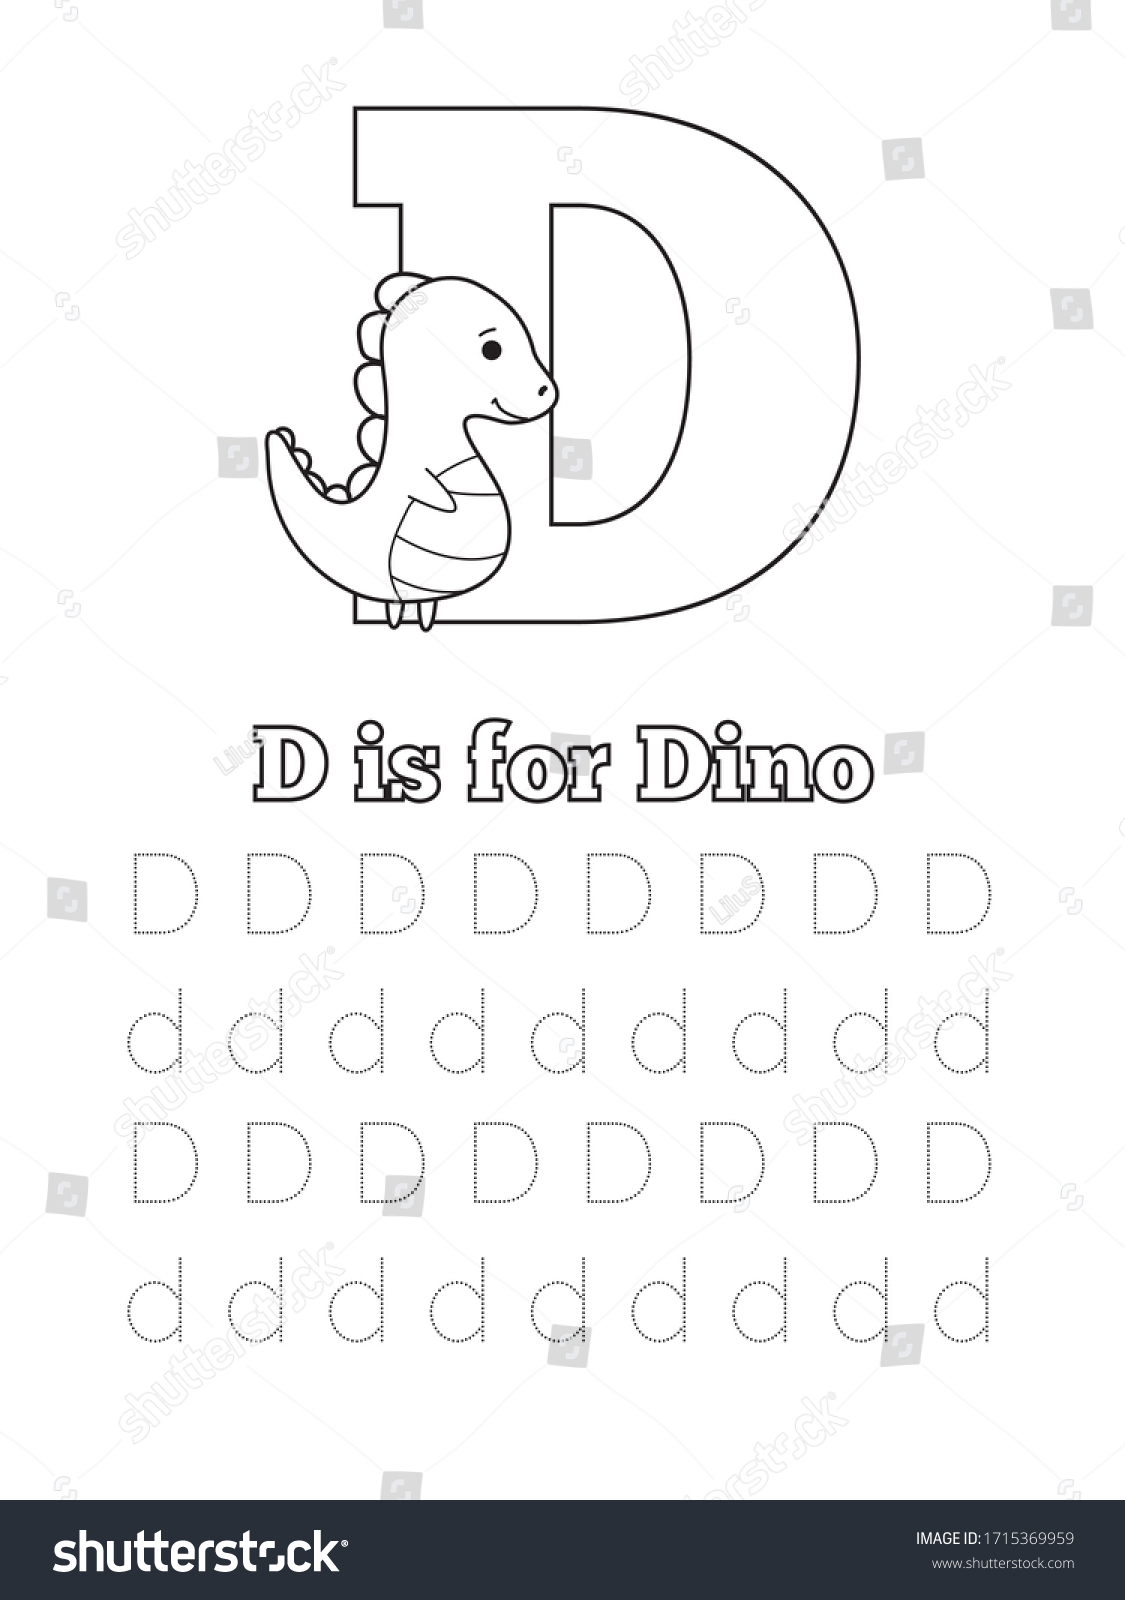 Dis dinosaur coloring pages letter d stock vector royalty free